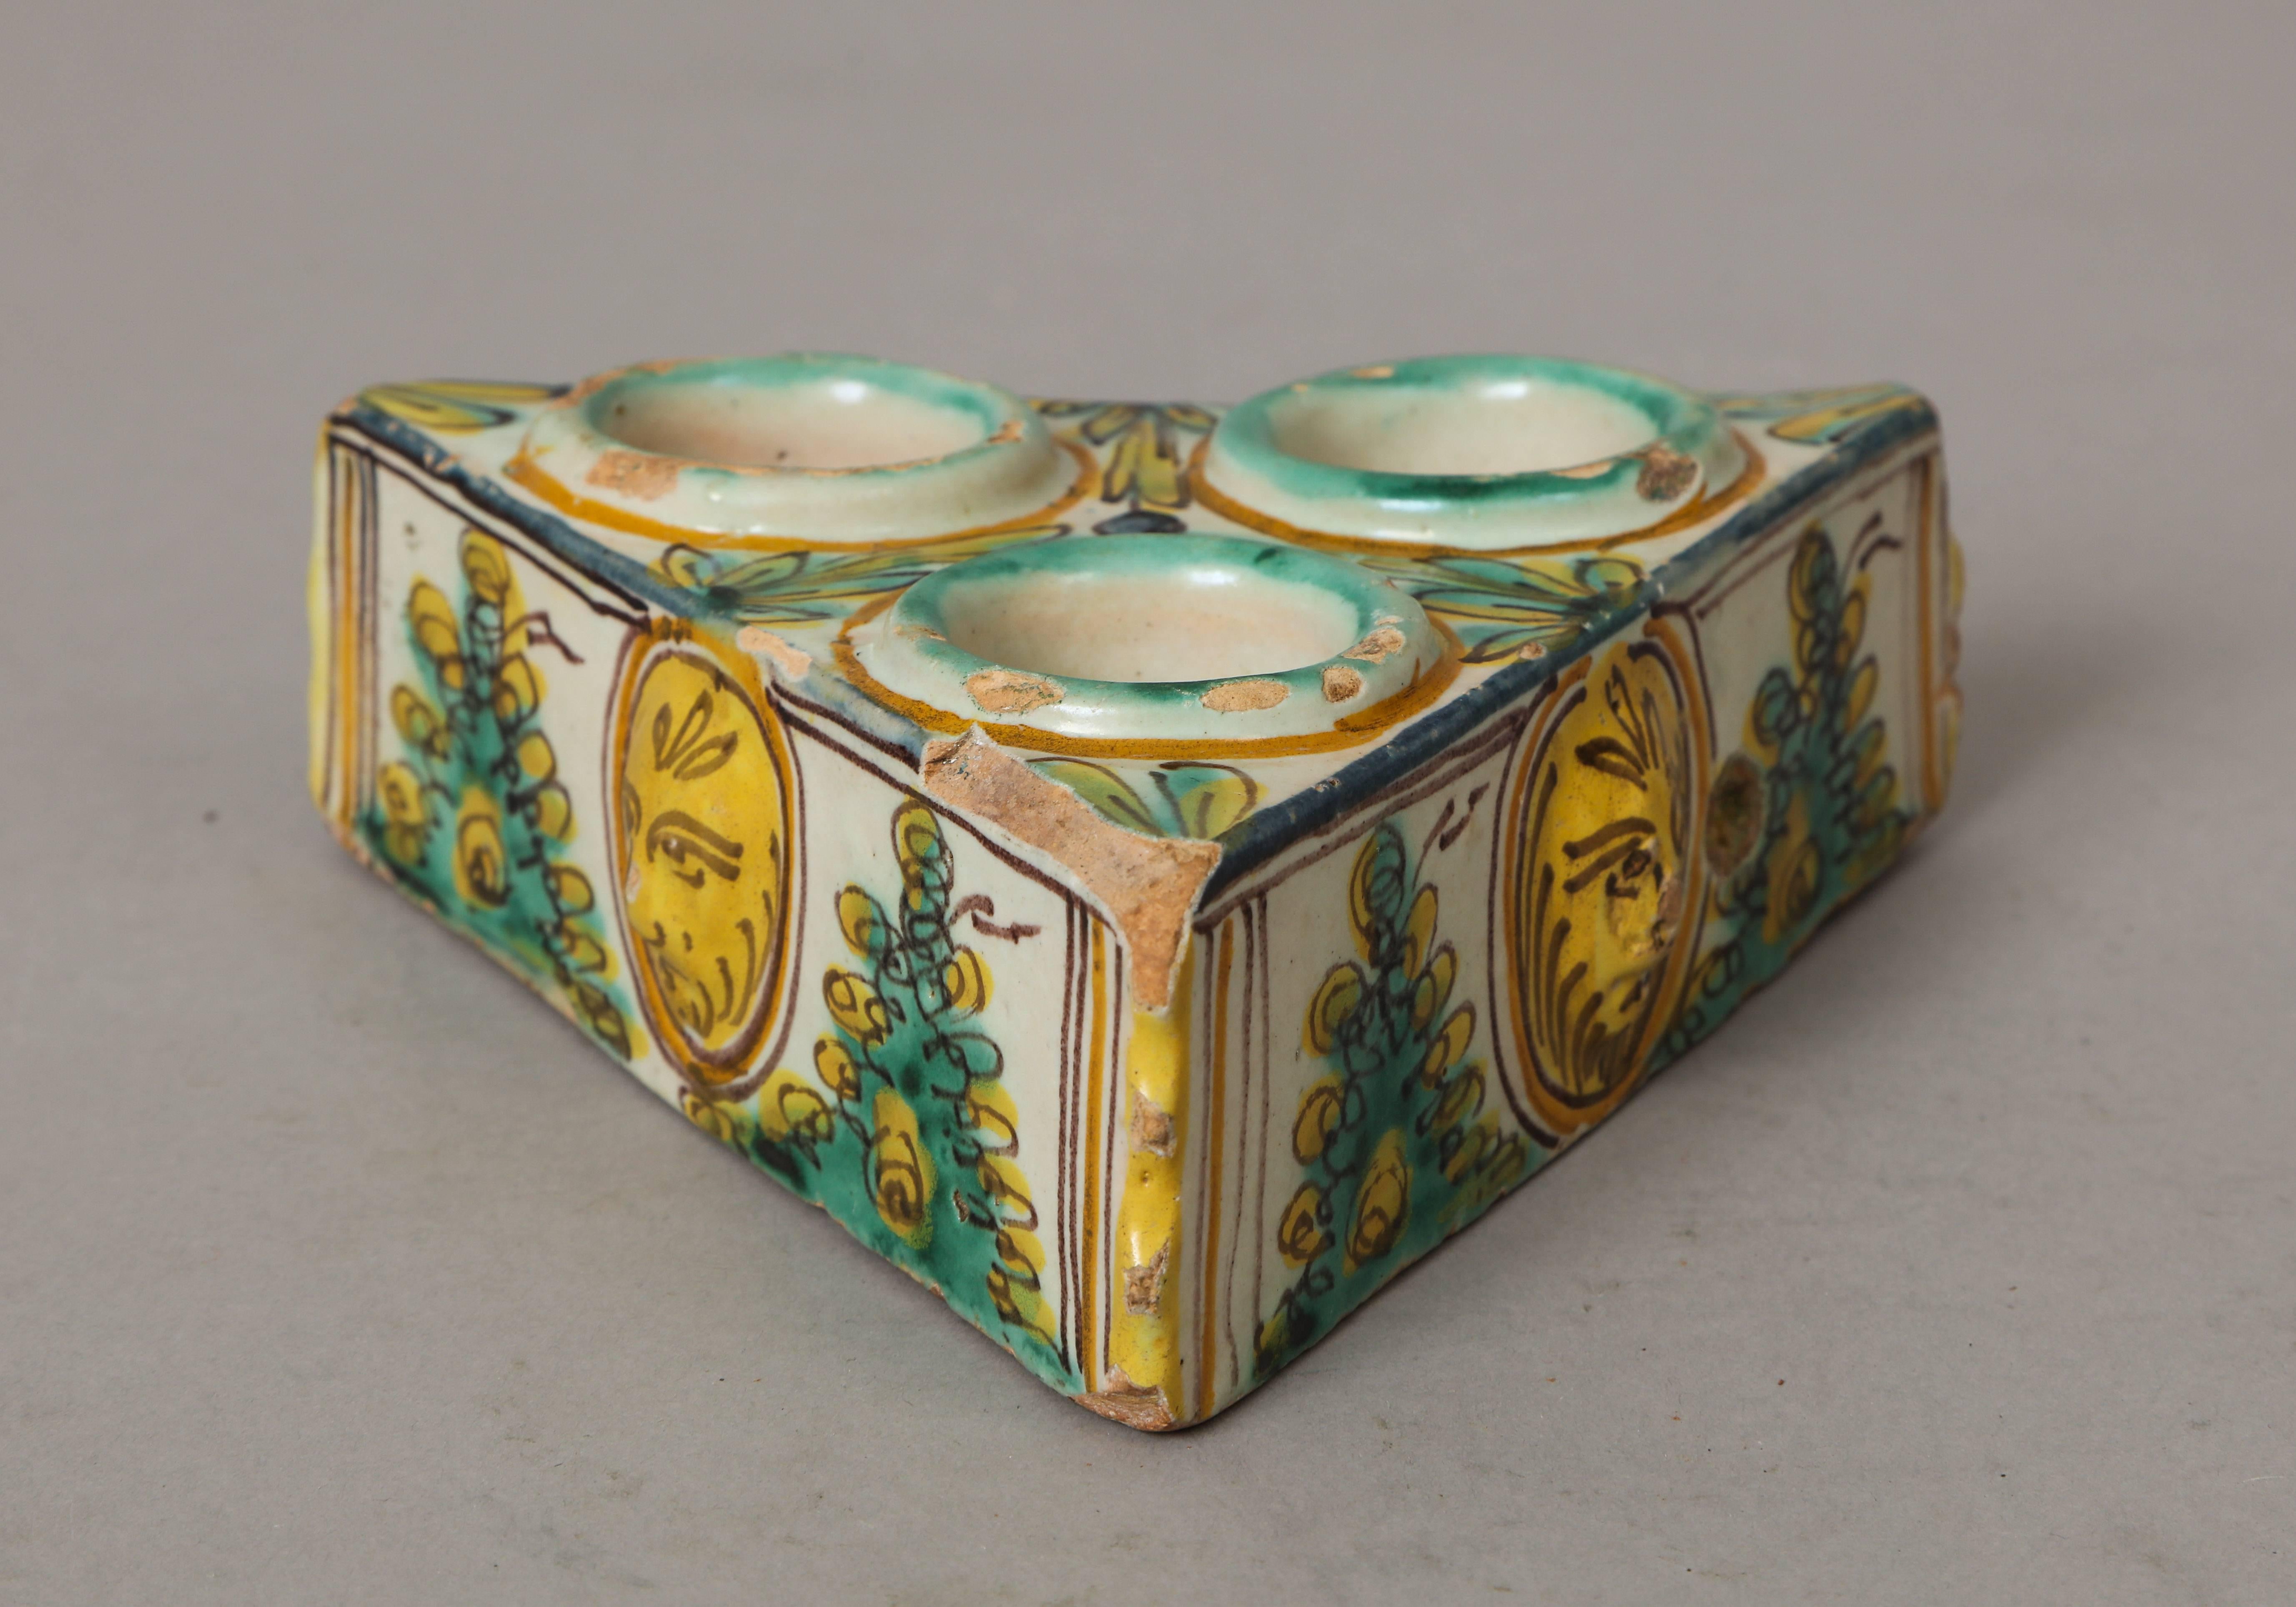 A charming Spanish late 17th century ceramic polychrome salt cellar in turquoise, cream and yellow; with masquerone and foliage motif; with three bowls.
Size: 2” high x 6”.